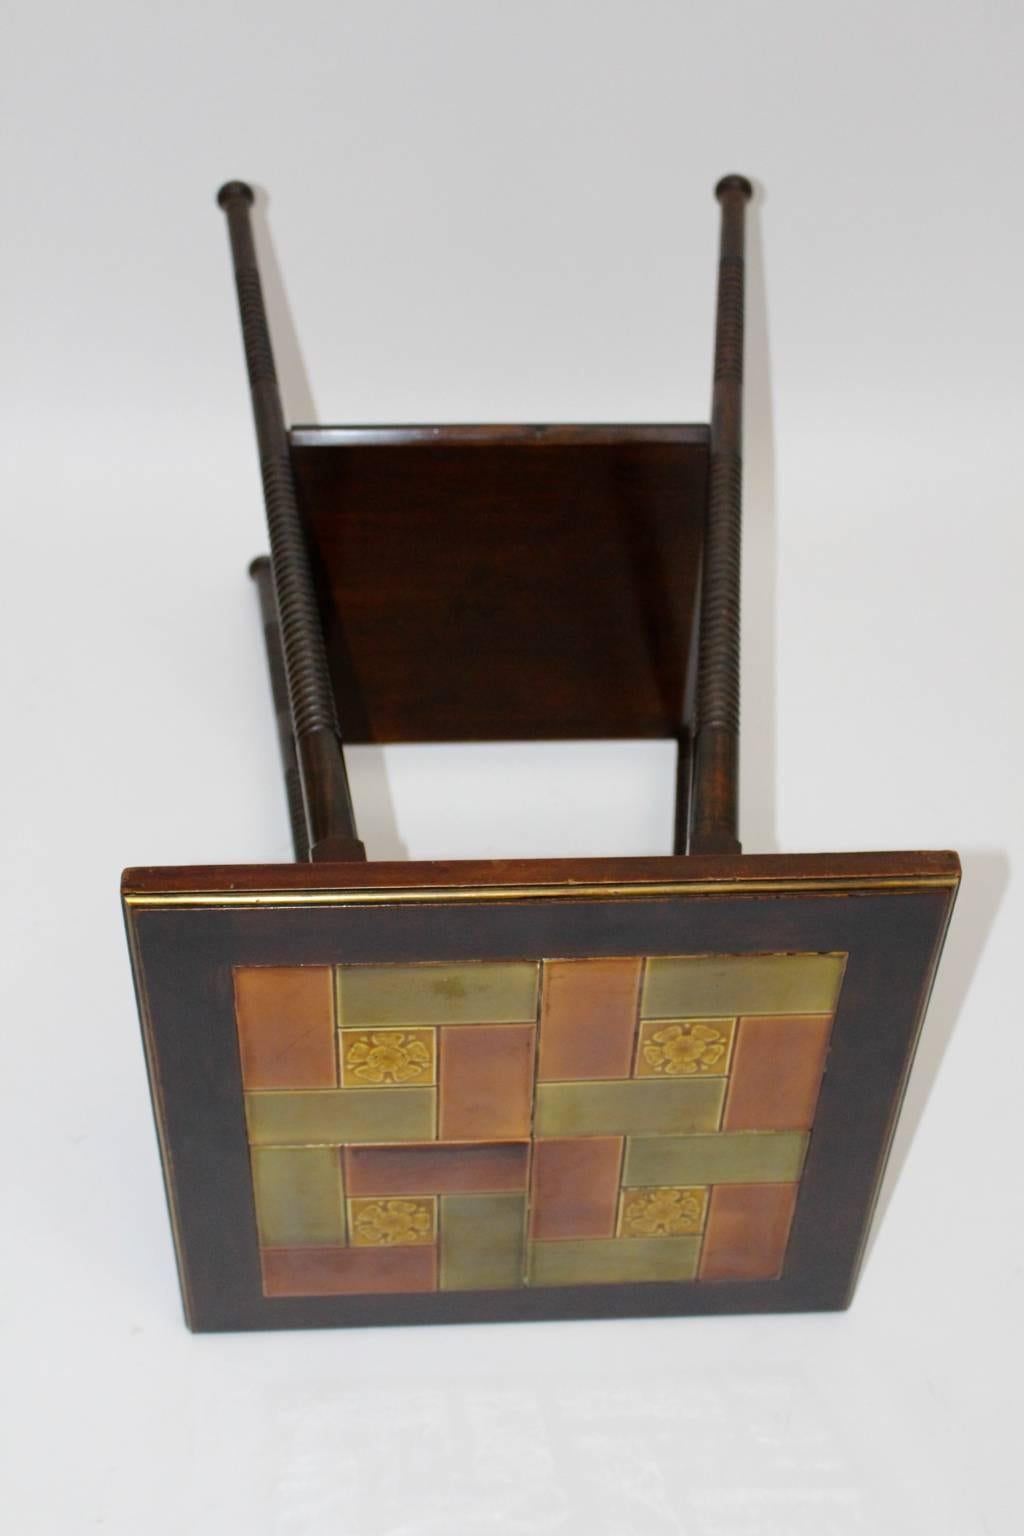 Art Deco Era Side Table, circa 1930 with Ceramic Tiles Used by Adolf Loos In Good Condition For Sale In Vienna, AT